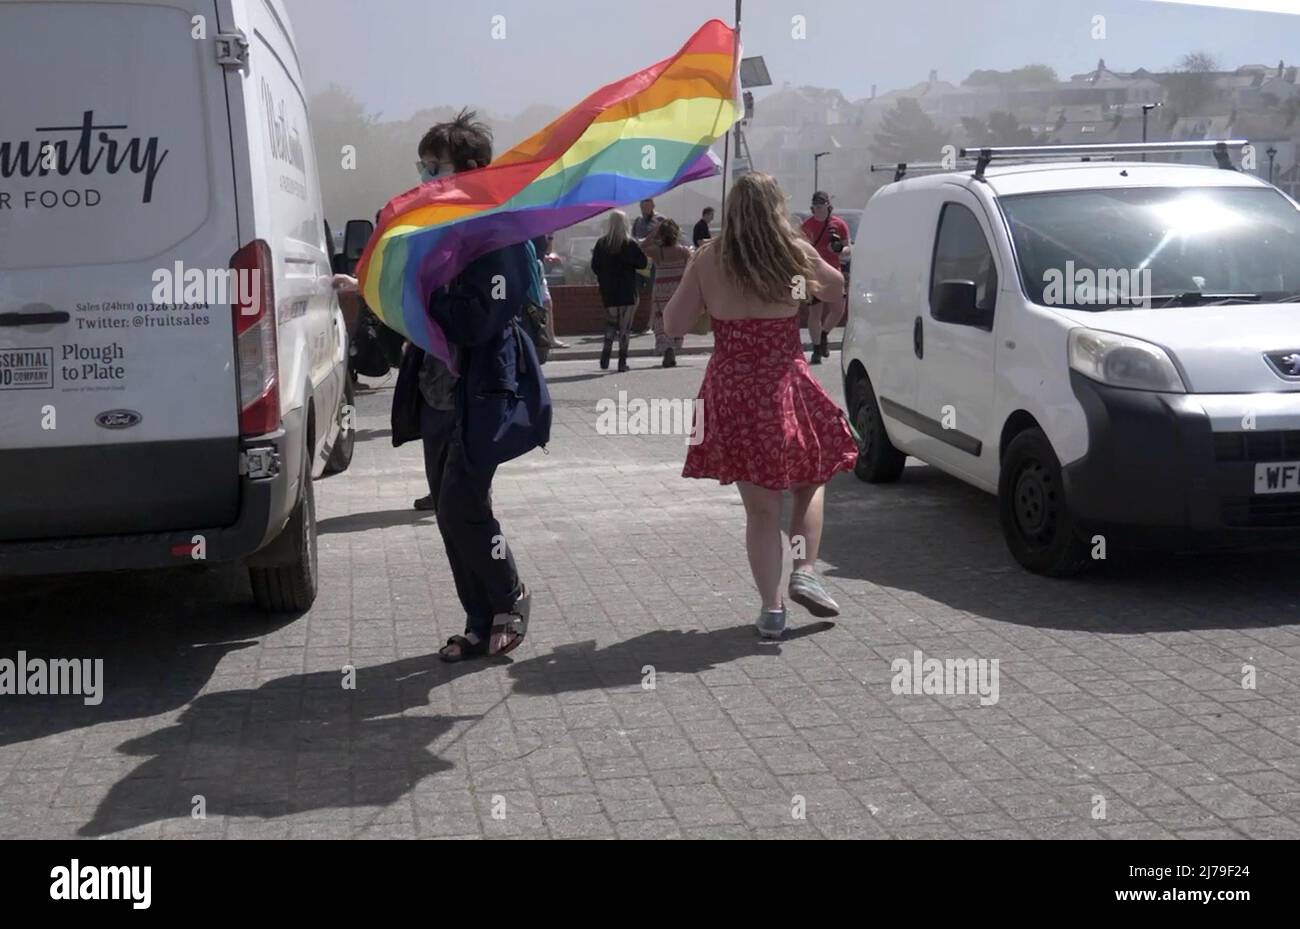 Falmouth Cornwall, UK 07th May 2022. A hero deputy town mayor replete with the chain of office and clutching her Rainbow pride flag is seen running towards a fire which has broken out in steak restaurant located in the Event square of Falmouth town. The Big Gay pride entertainment venue had to be evacuated for the safety of the crowds attending. Councillor Kirsty Edwards is a keen supporter of minority rights.  Falmouth Cornwall   Robert Taylor Alamy Live News Stock Photo